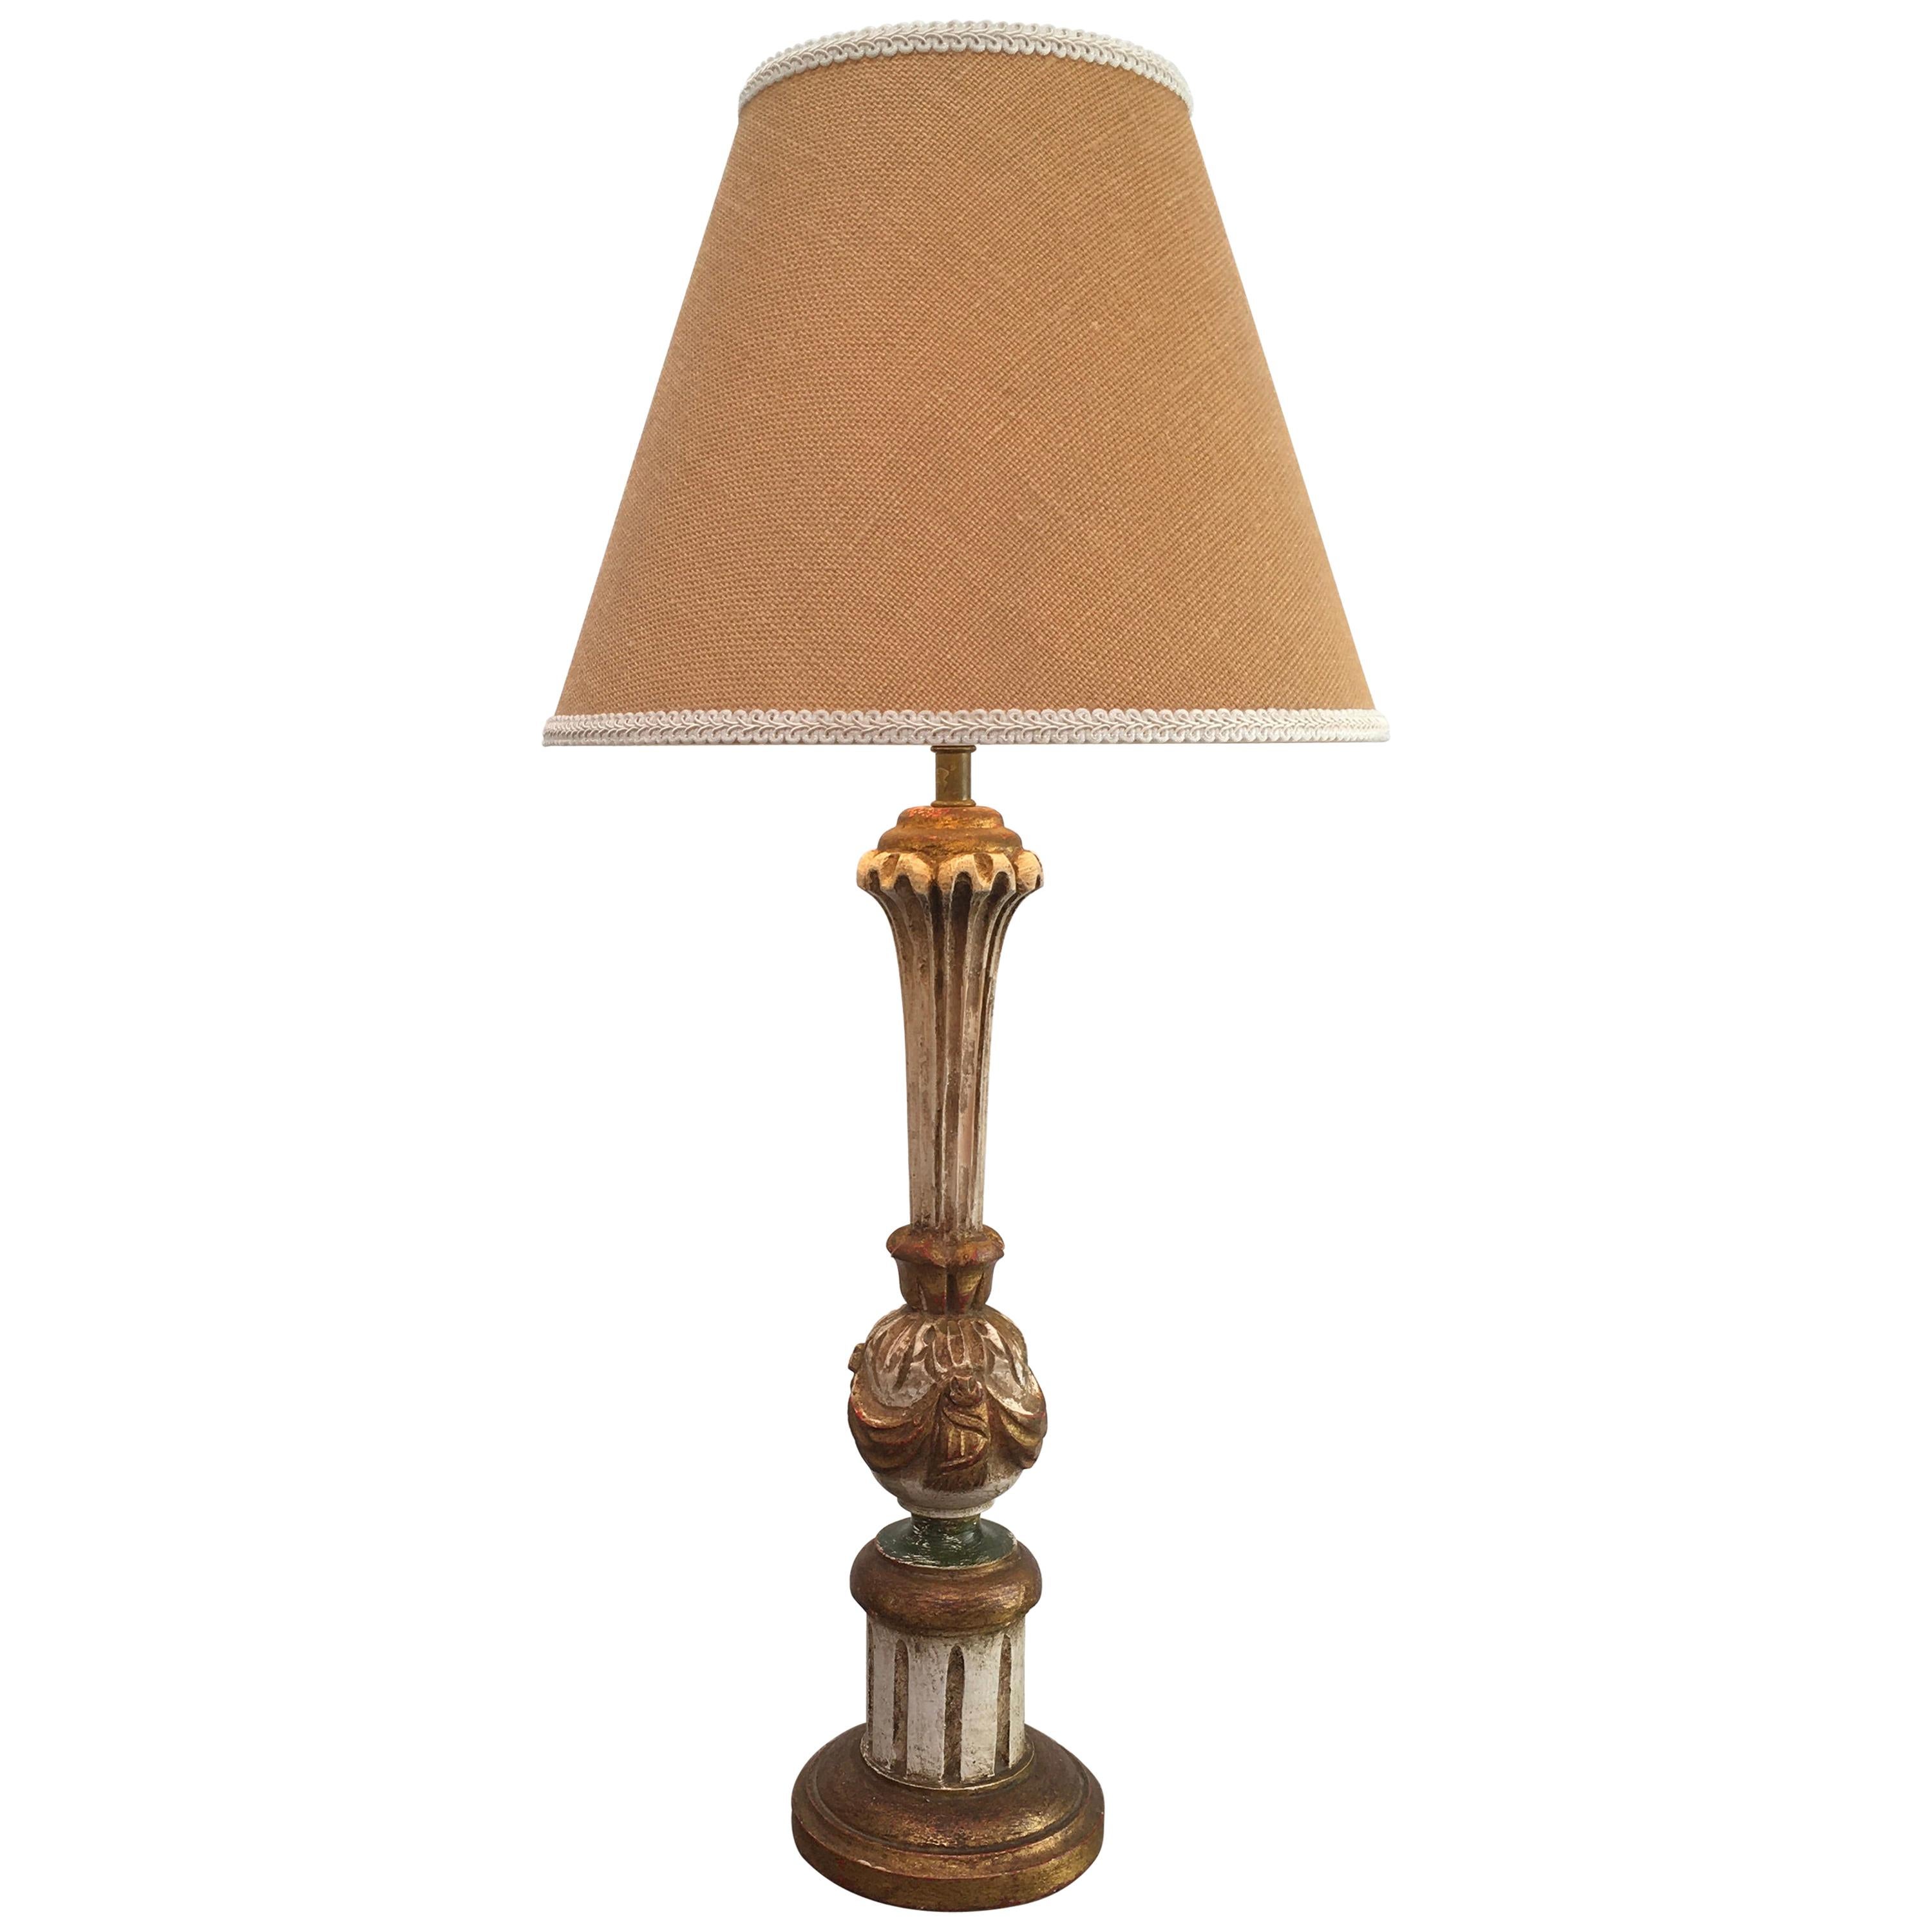 Mid-20th Century Florentine Giltwood Lamp with Original Shade Regency Style For Sale